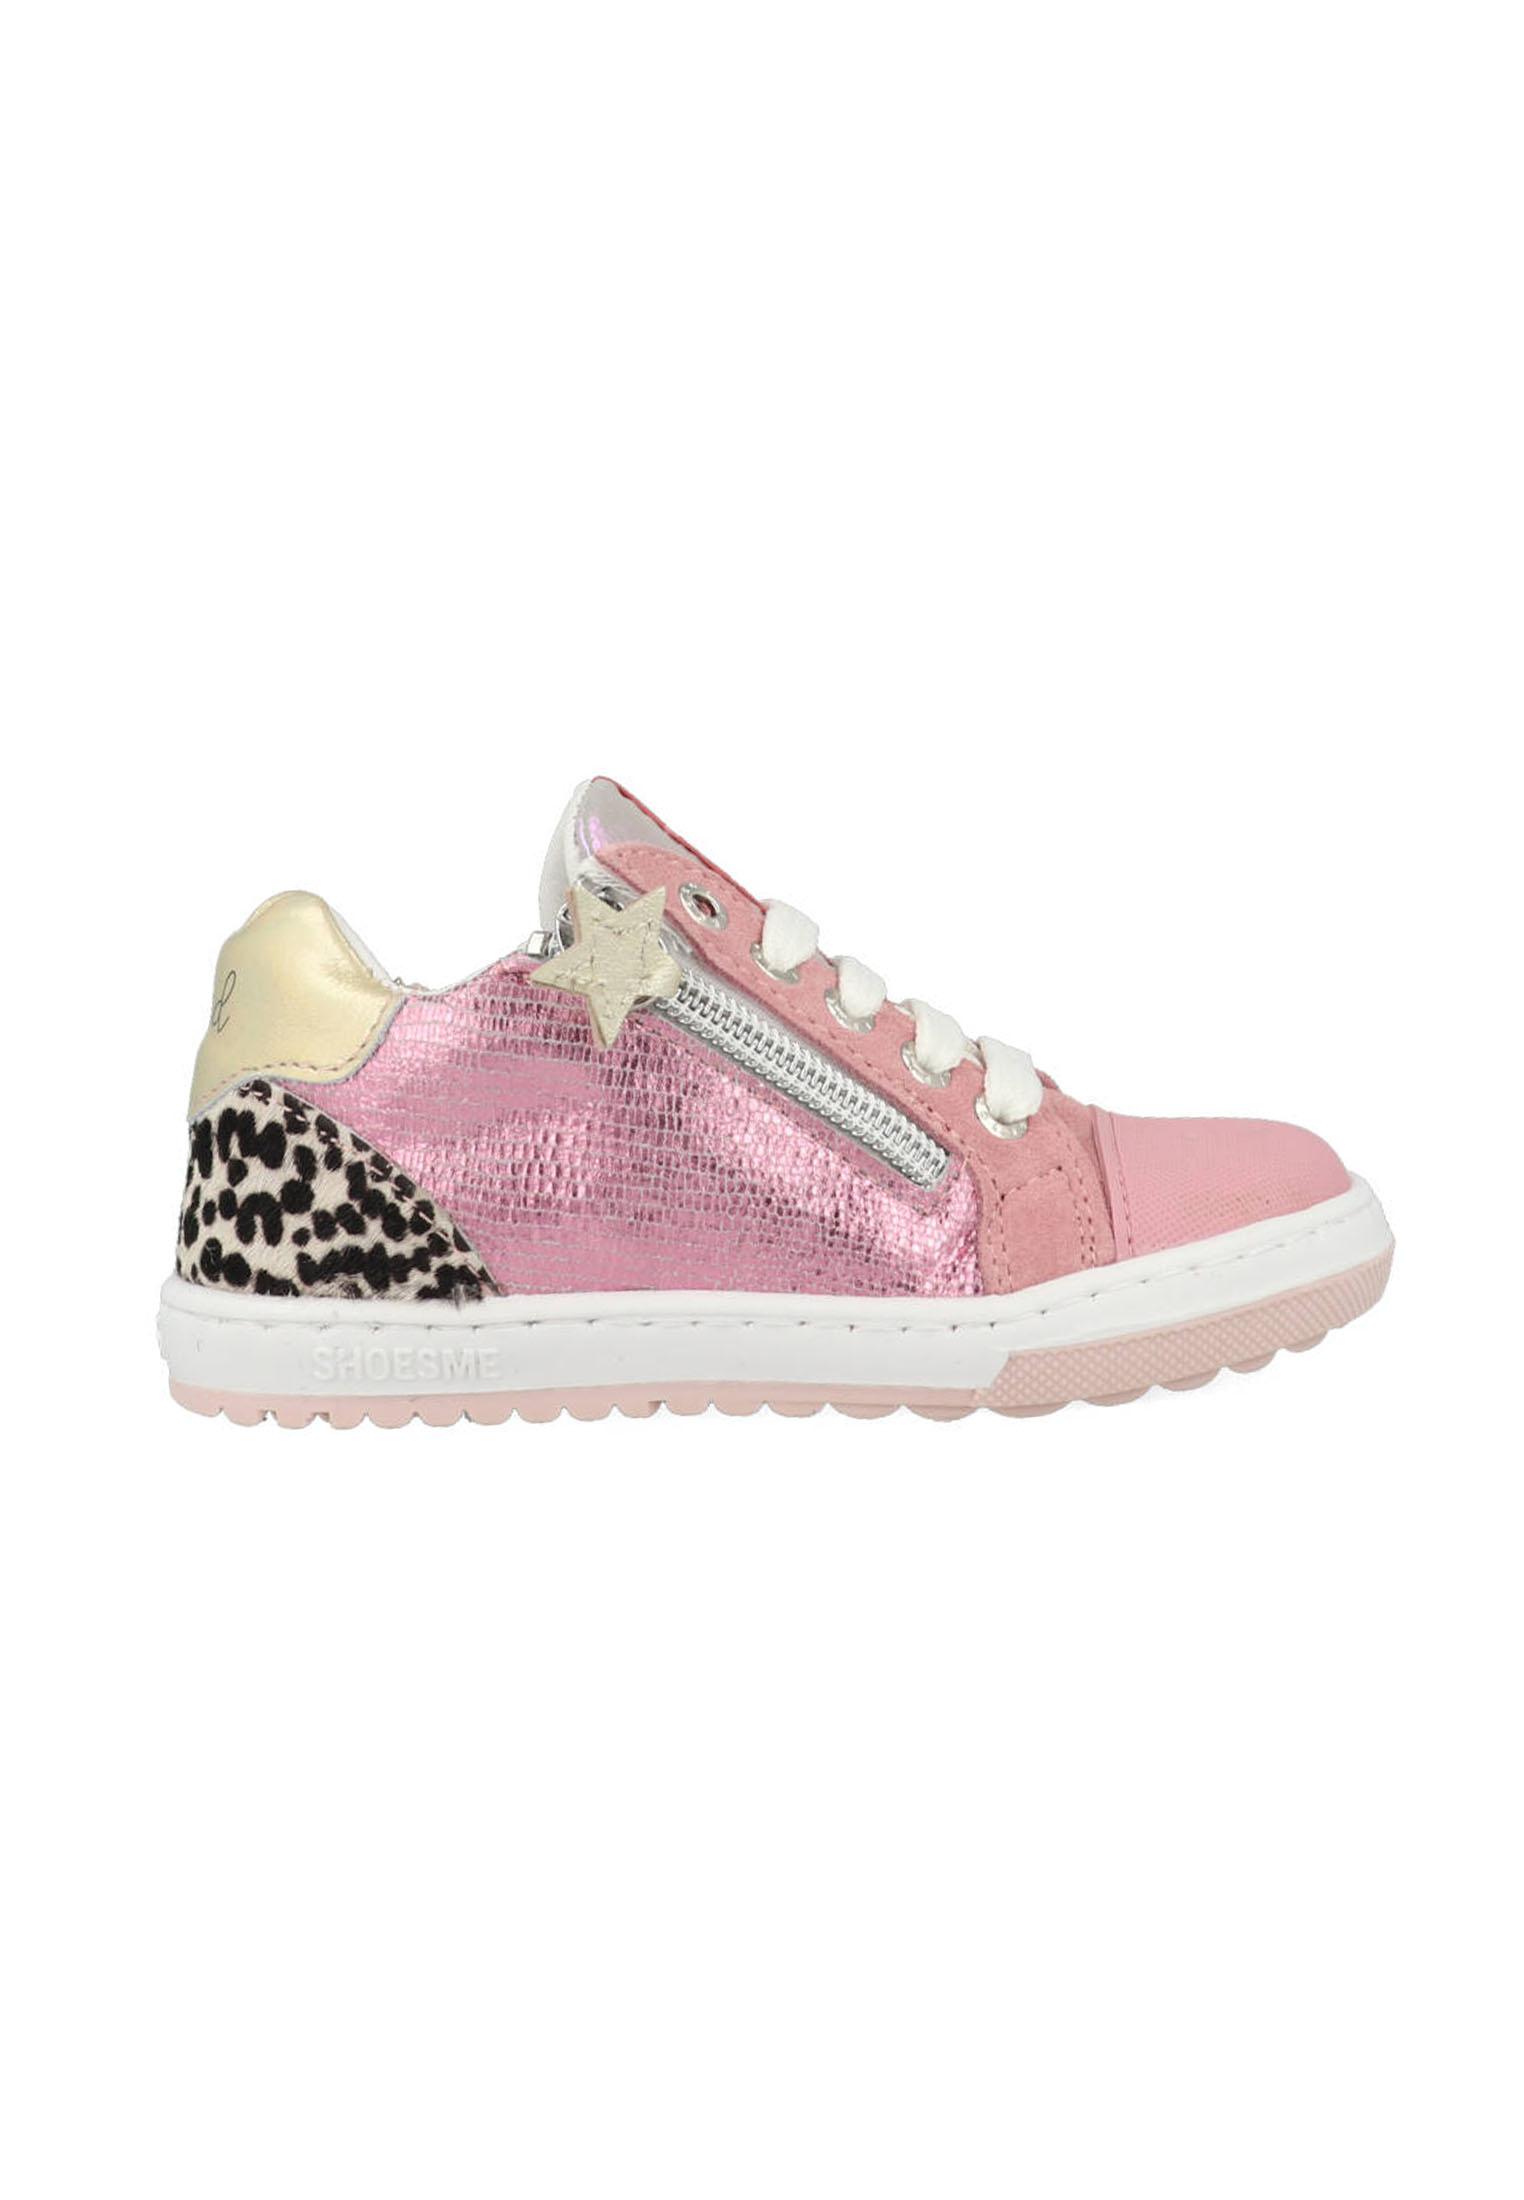 Shoesme Sneakers EF22S003-A Roze-21 maat 21